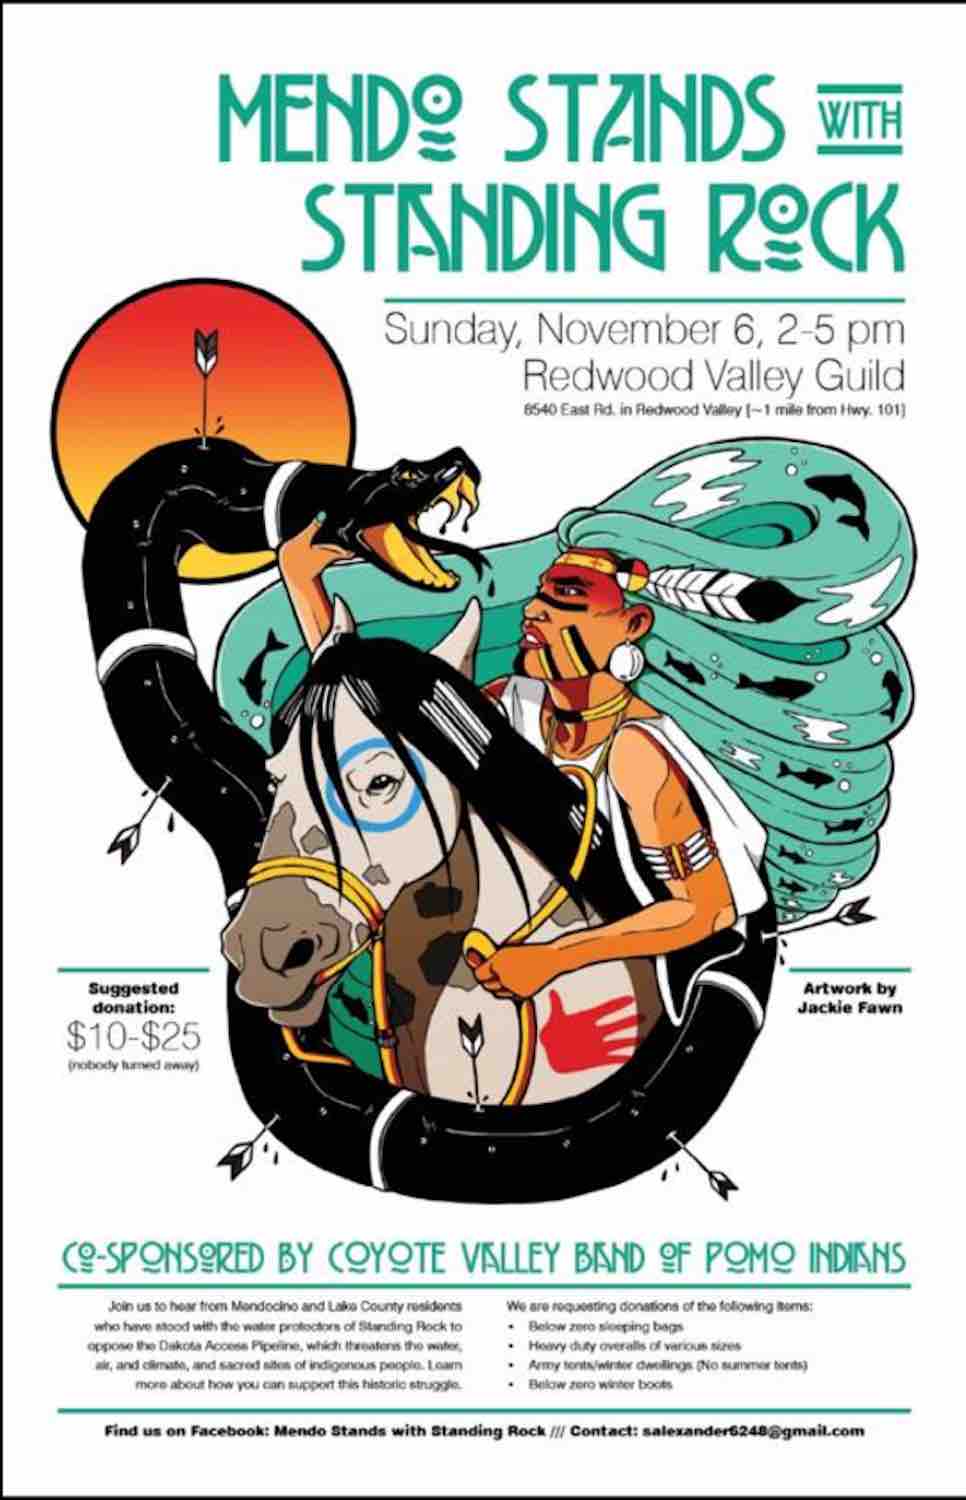 The flyer for the November 6 "Mendo Stands with Standing Rock" event.